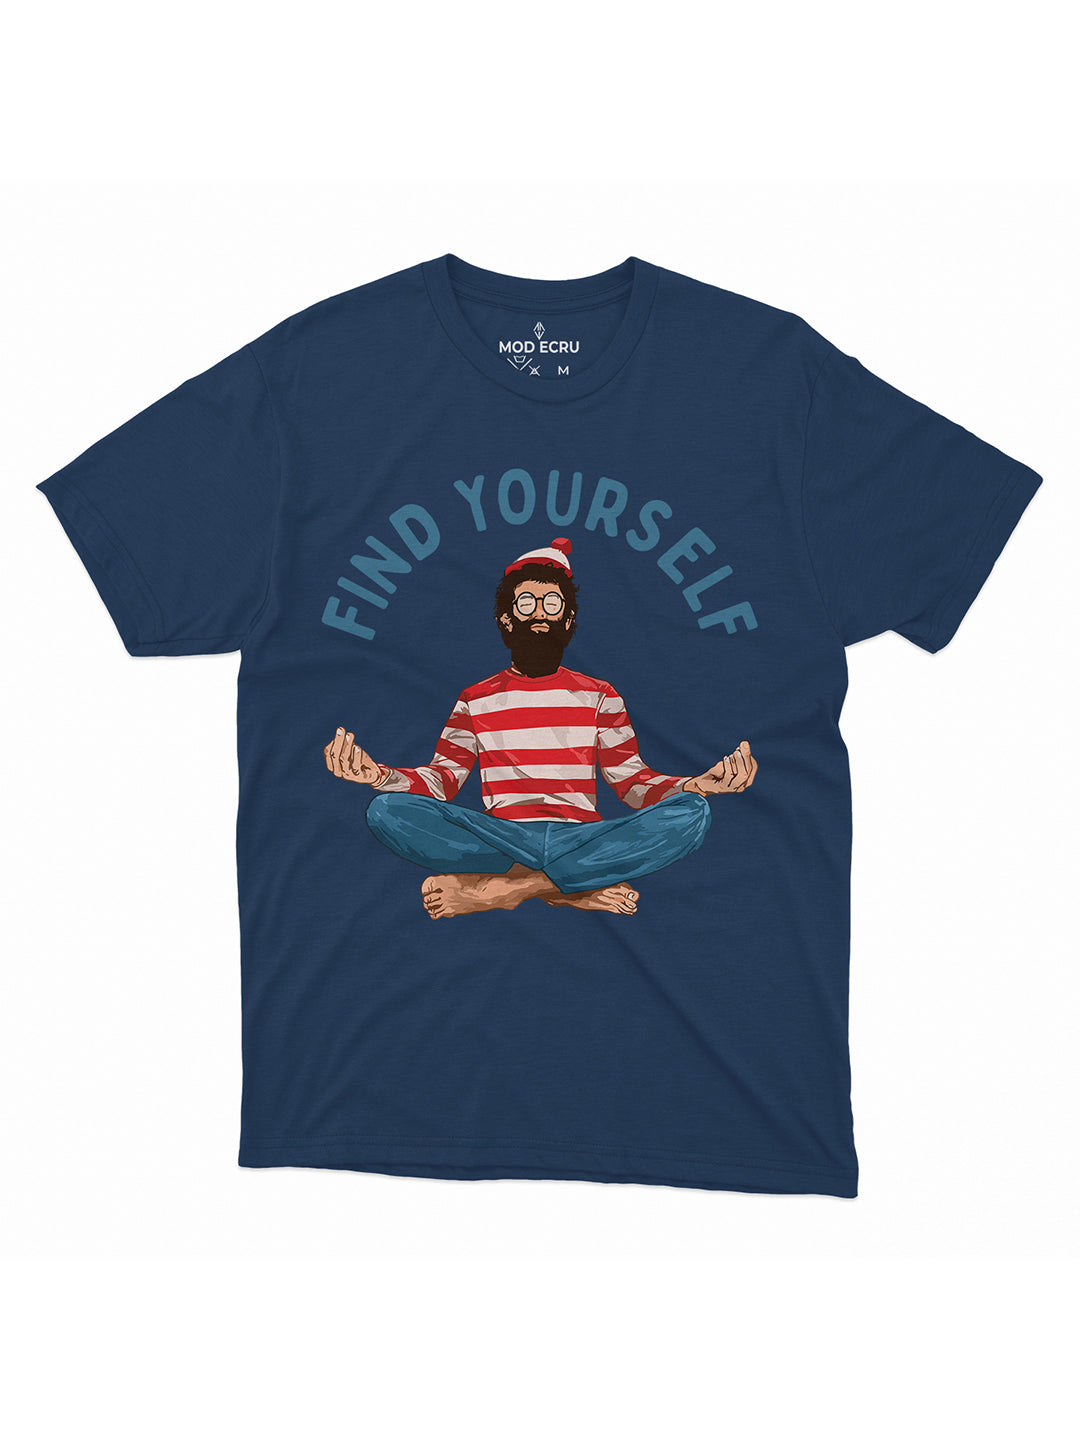 Find Yourself T-Shirt